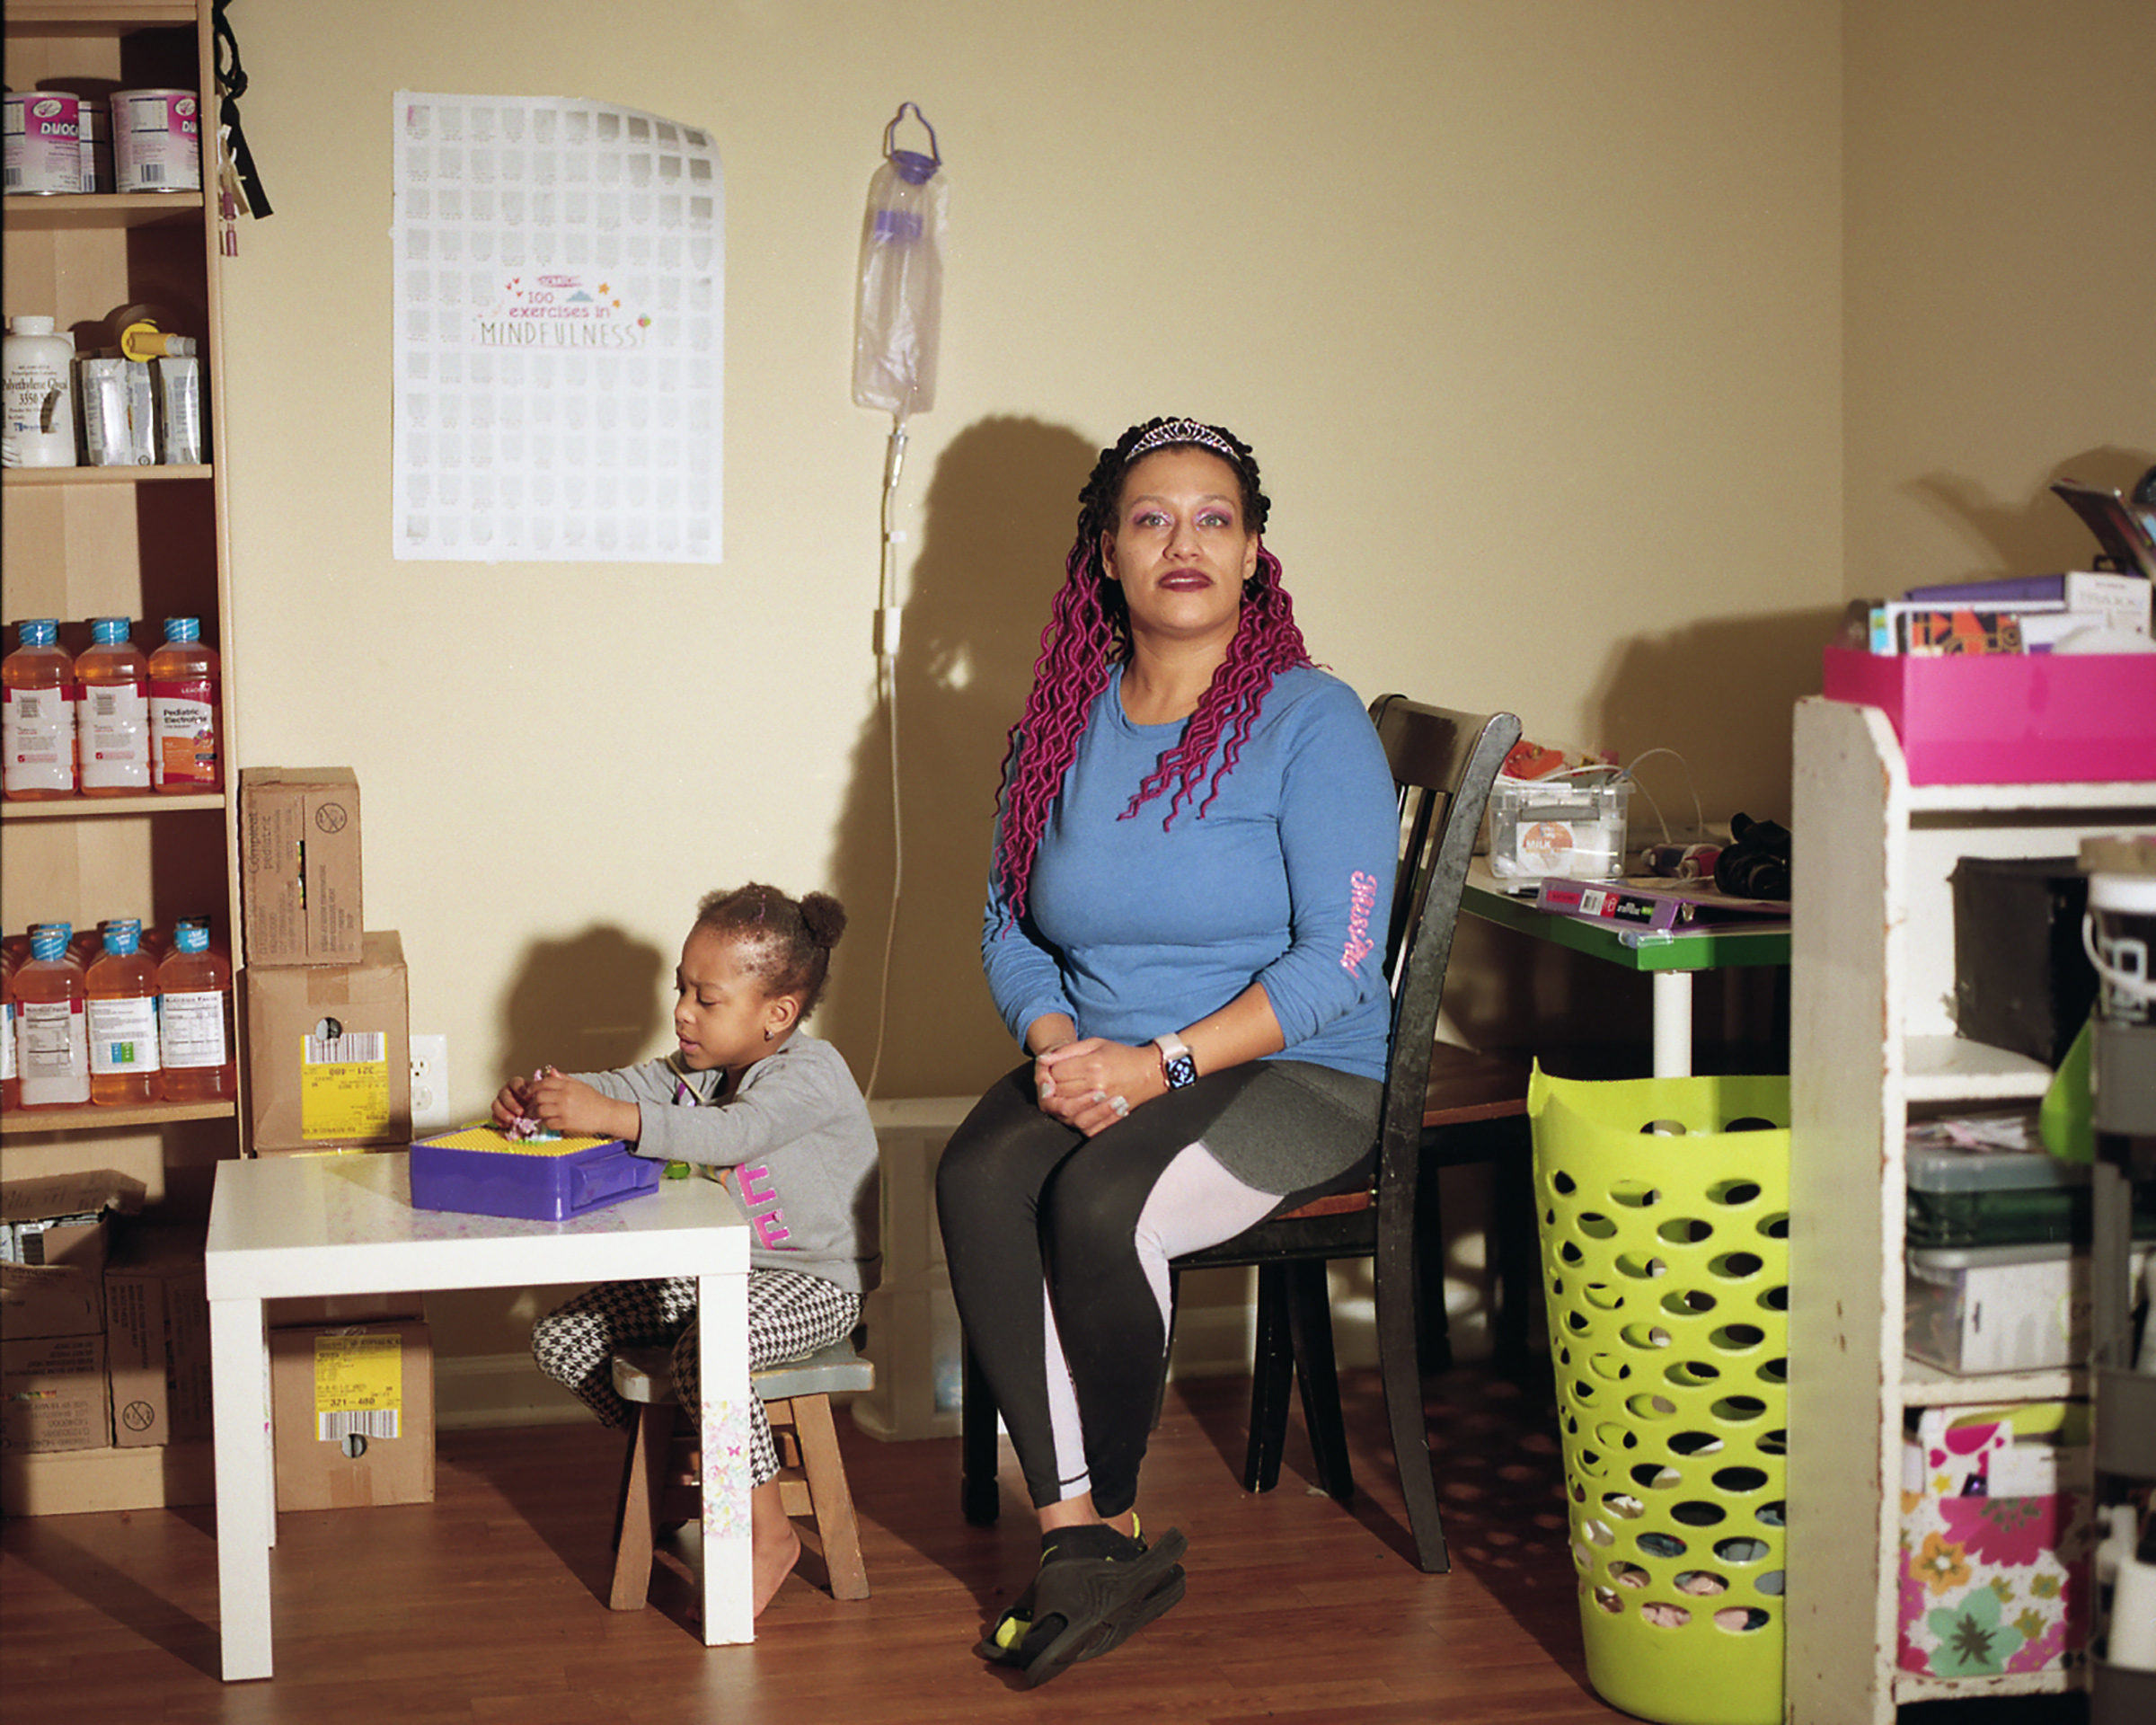 A third-floor walk-up isn’t ideal for Shneila Lee’s children with special needs, but she worries she won’t find another landlord willing to accept her housing subsidy.